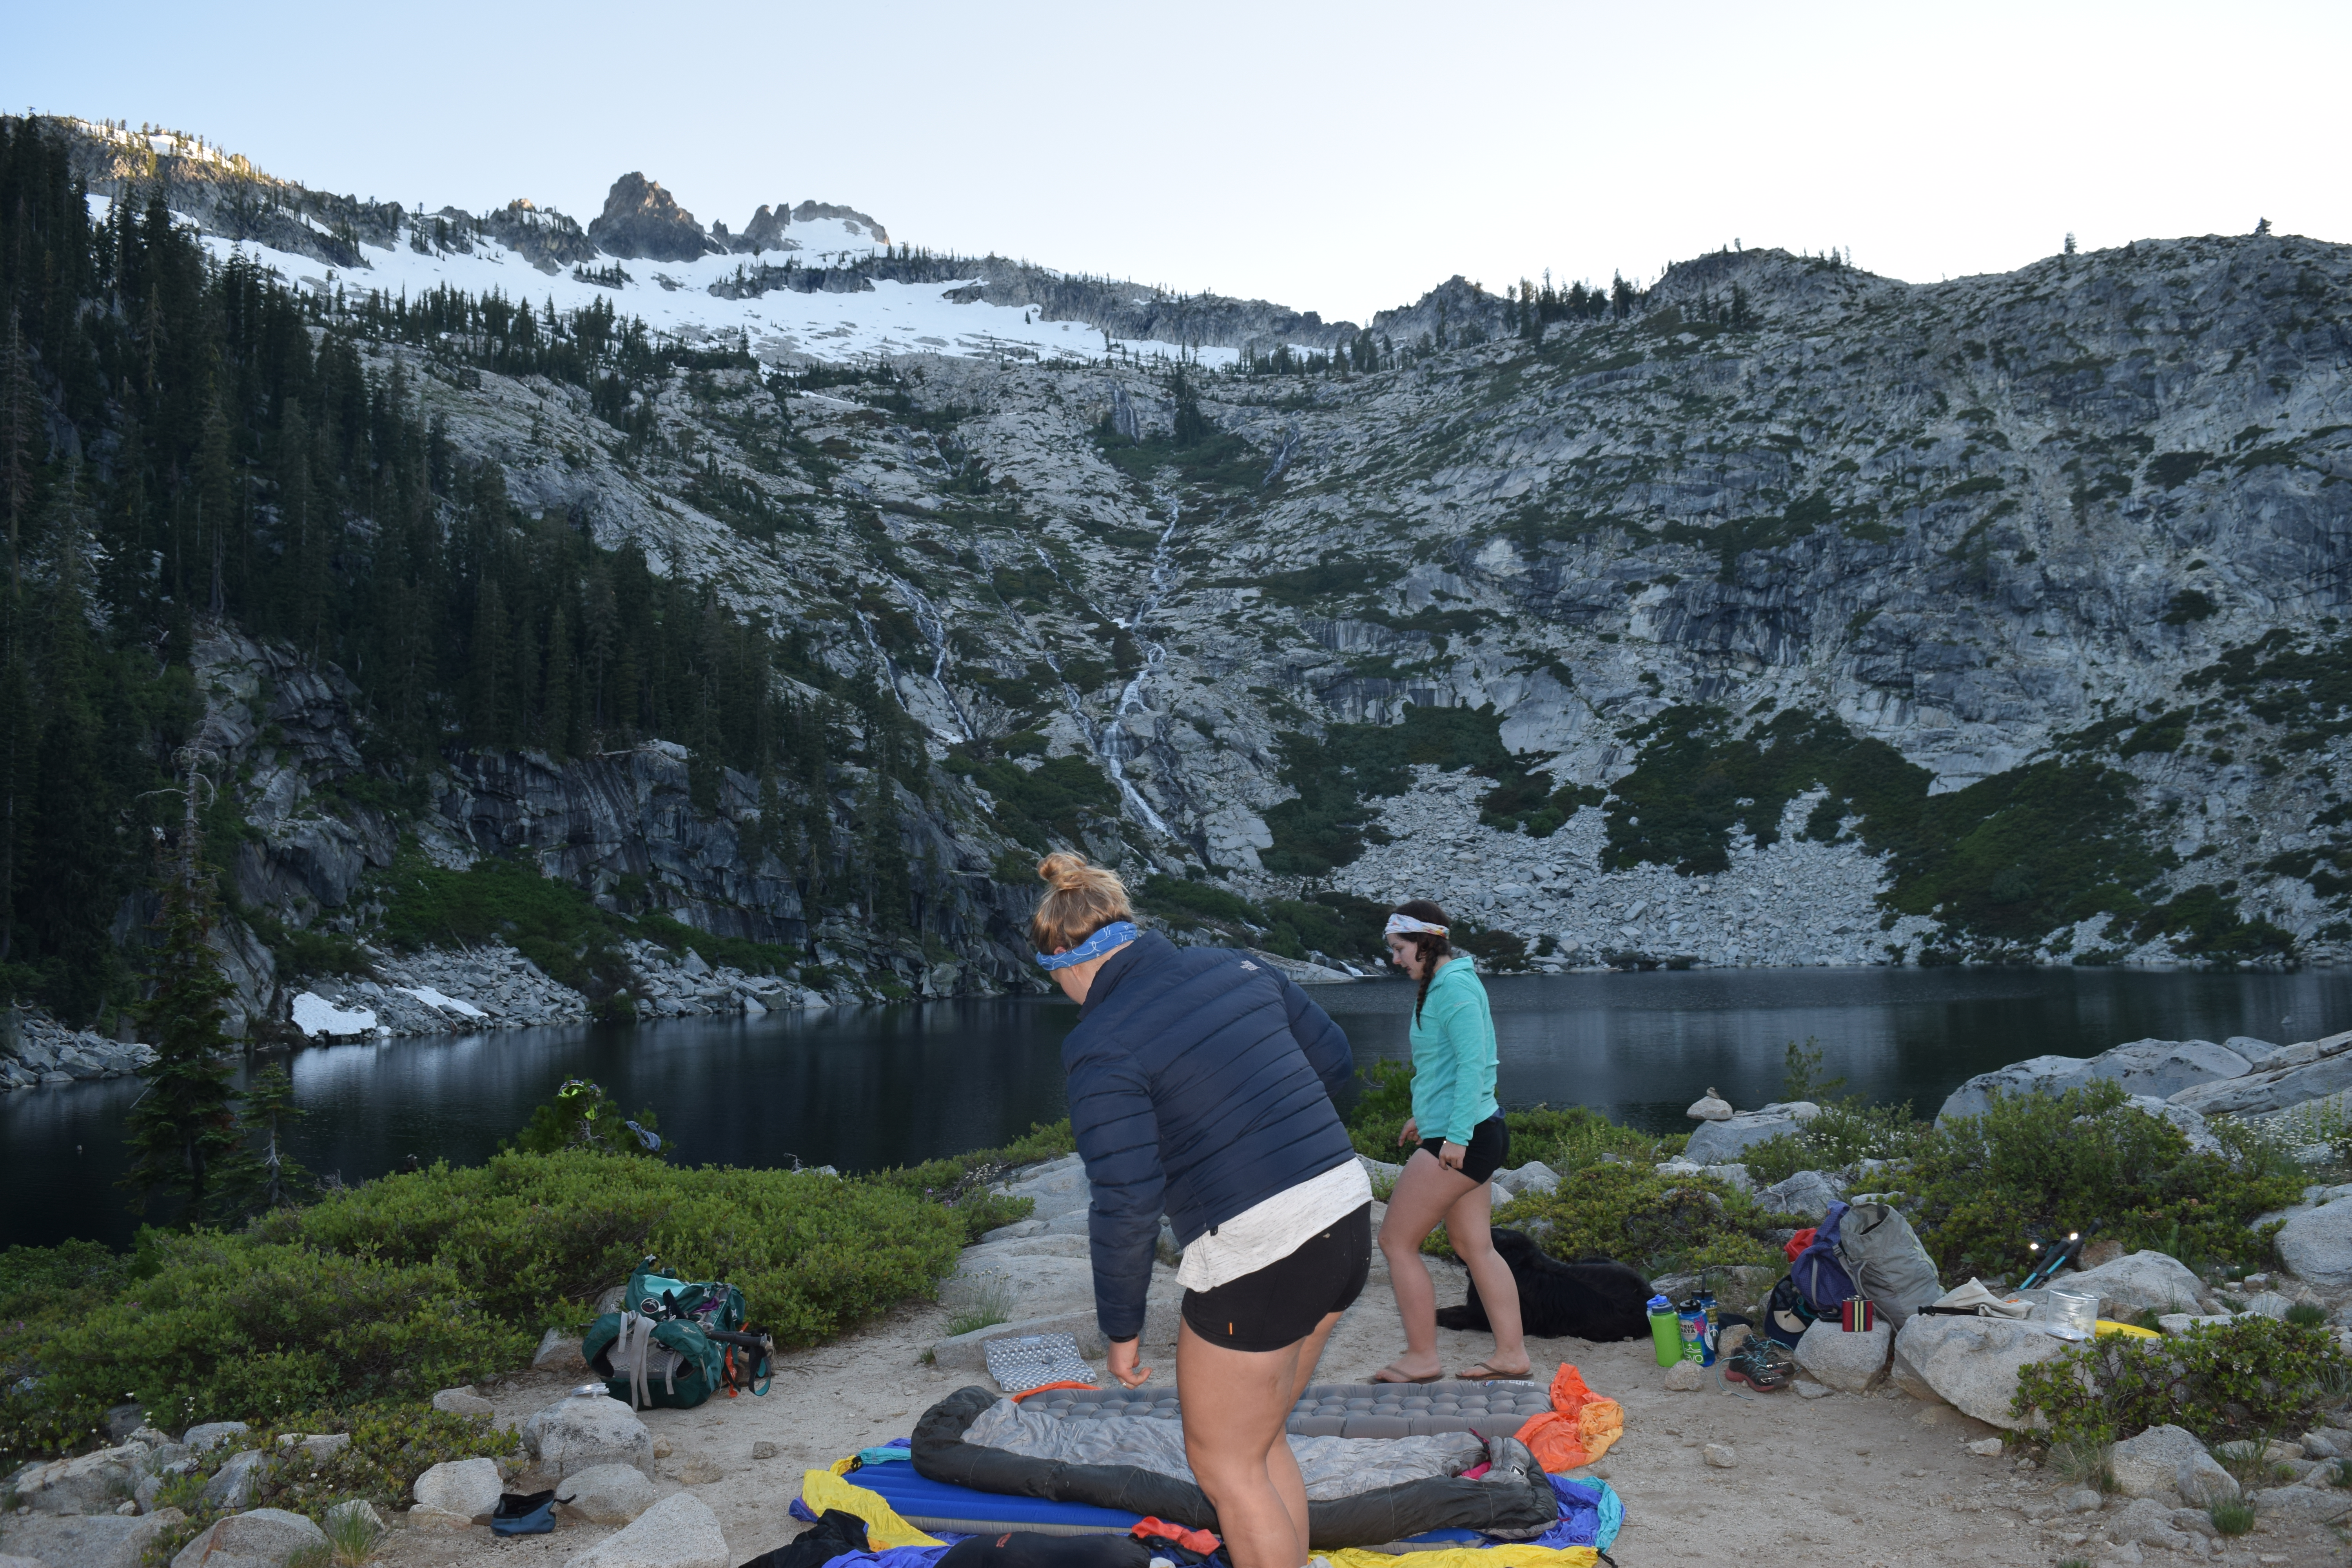 Two woman setting up a campsite overlooking a small lake in a mountain basin.